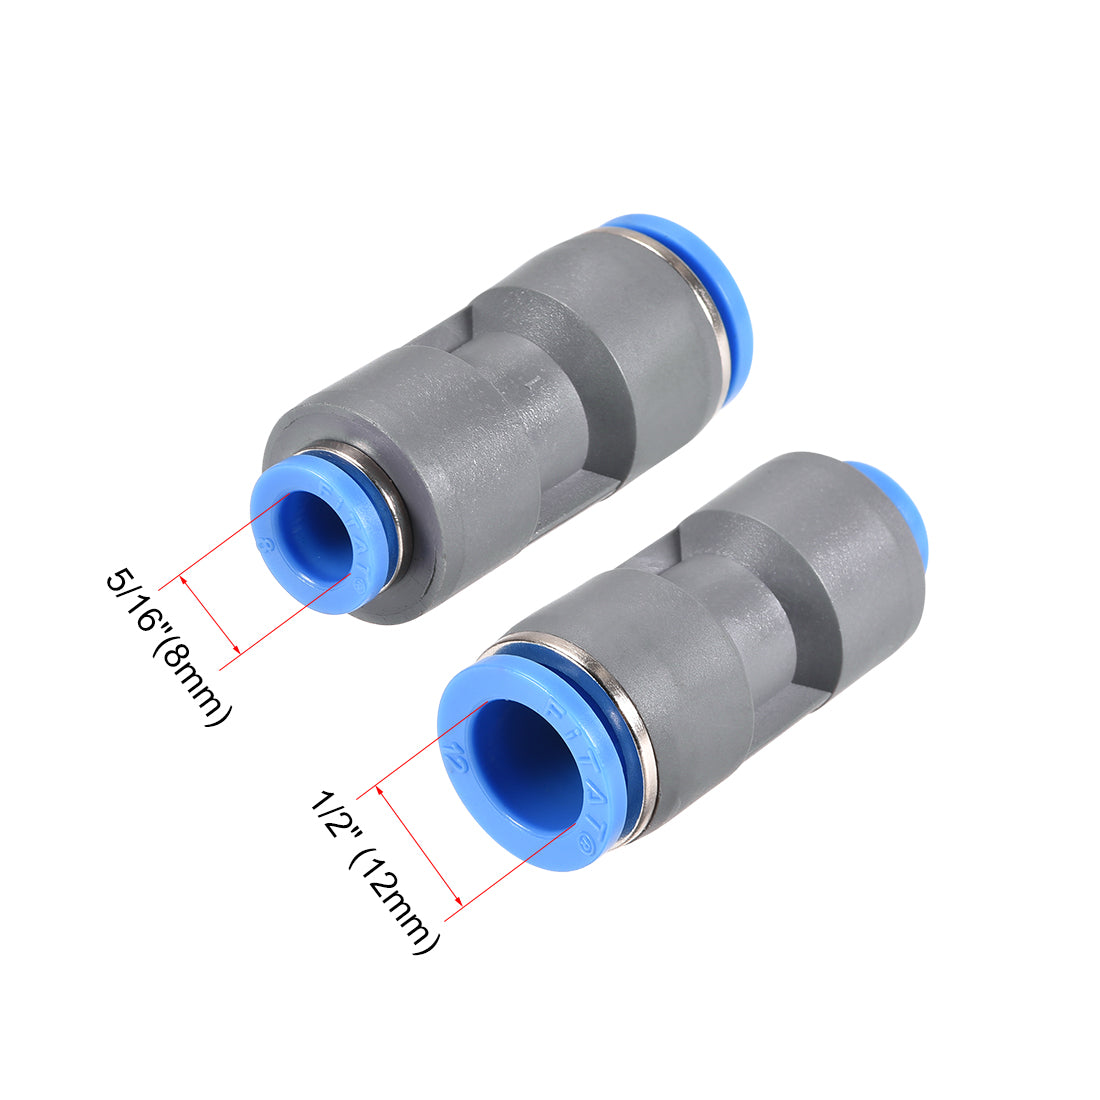 uxcell Uxcell Straight Push to Connector Reducer Fitting 12mm to 8mm Plastic Union Pipe Tube Fitting Grey 2Pcs